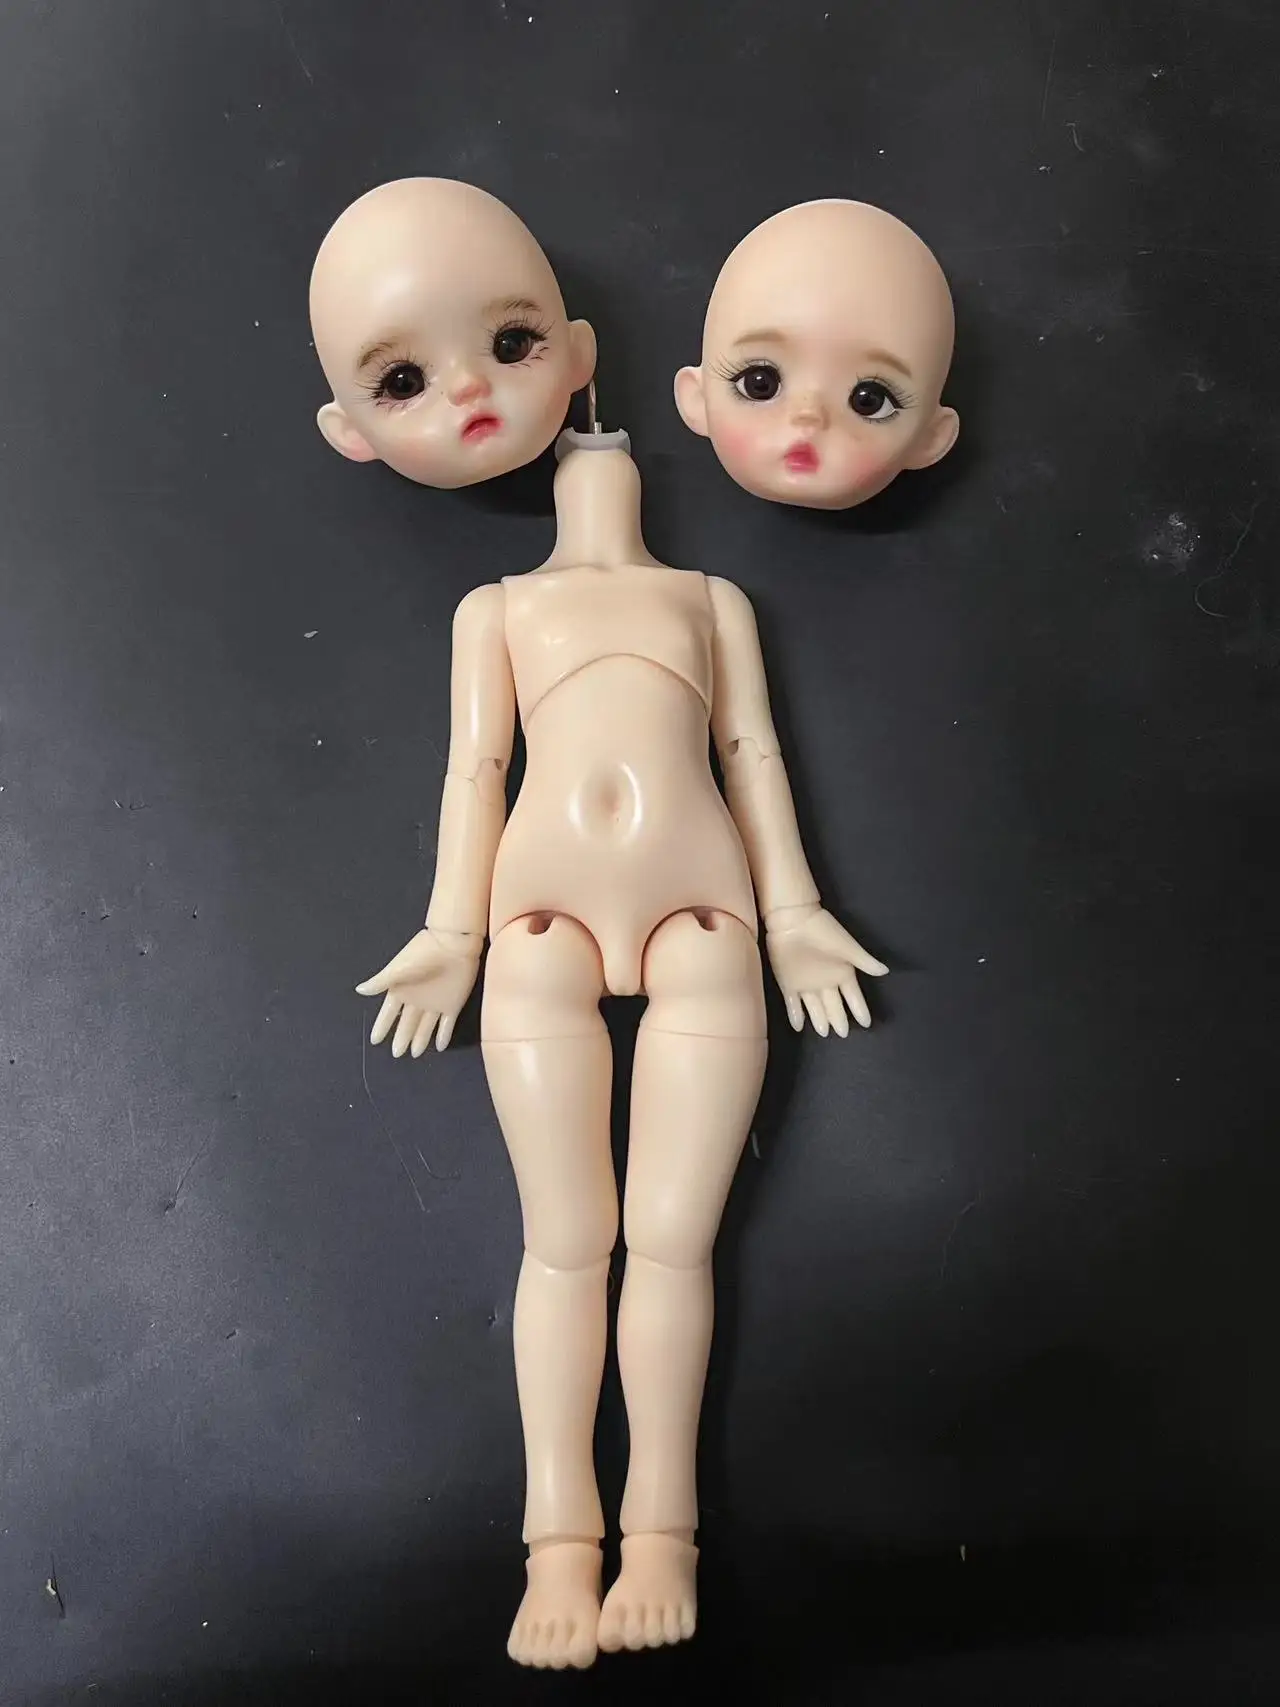 gaoshunBJD doll 1/6 1/8 dada chimu body didi zhuzhu freeshipping resin body mold present Ball-jointed dolls FOR SALE girls adult crystal handmade silicone mold transparent mirror cover dice game resin mold doll display spot diy jewelry making accessaries